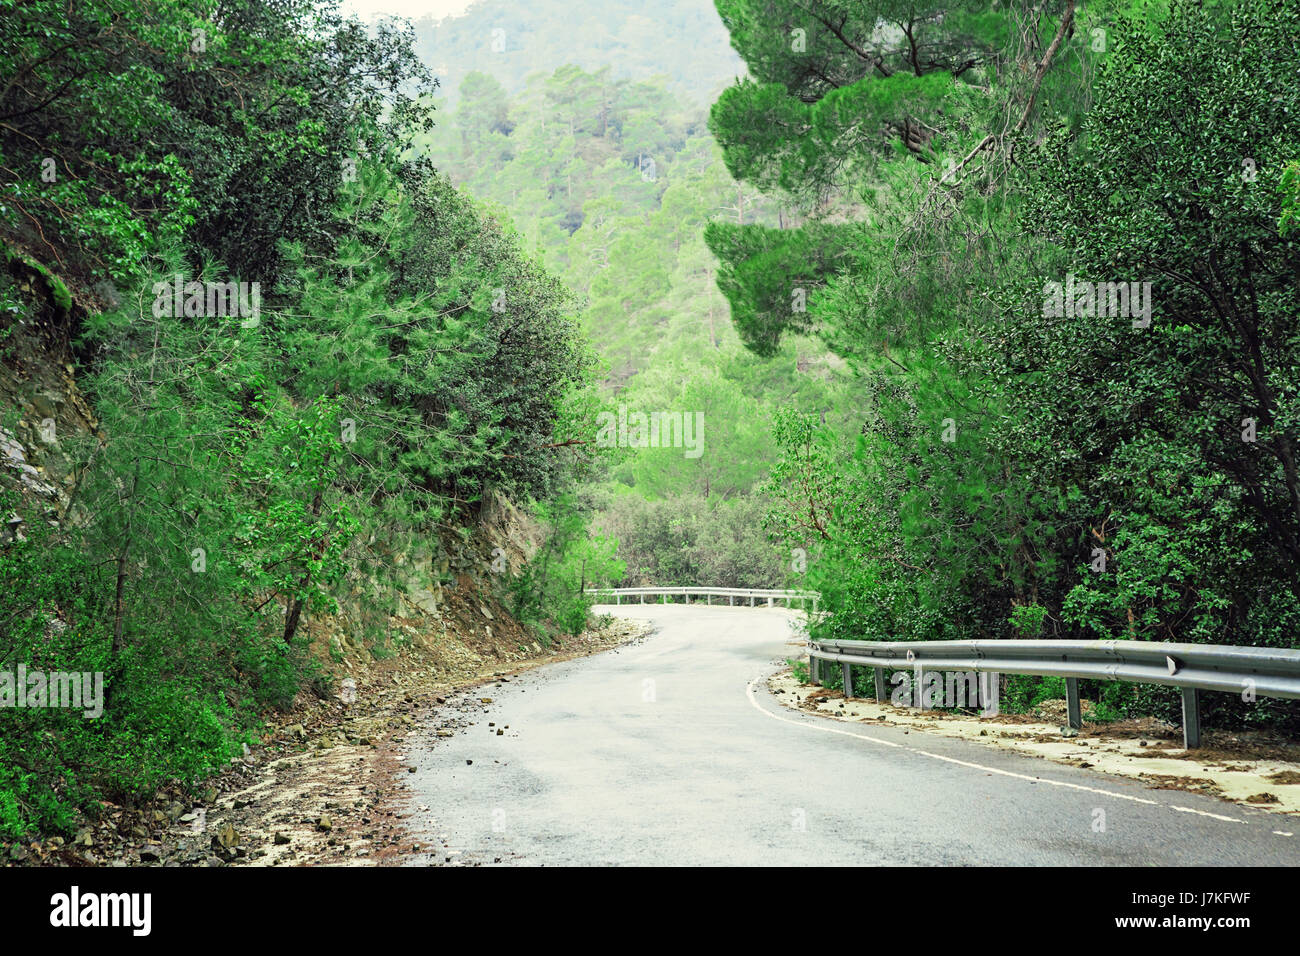 Stunning Scenic Route Through The Woods In The Mountains Stock Photo